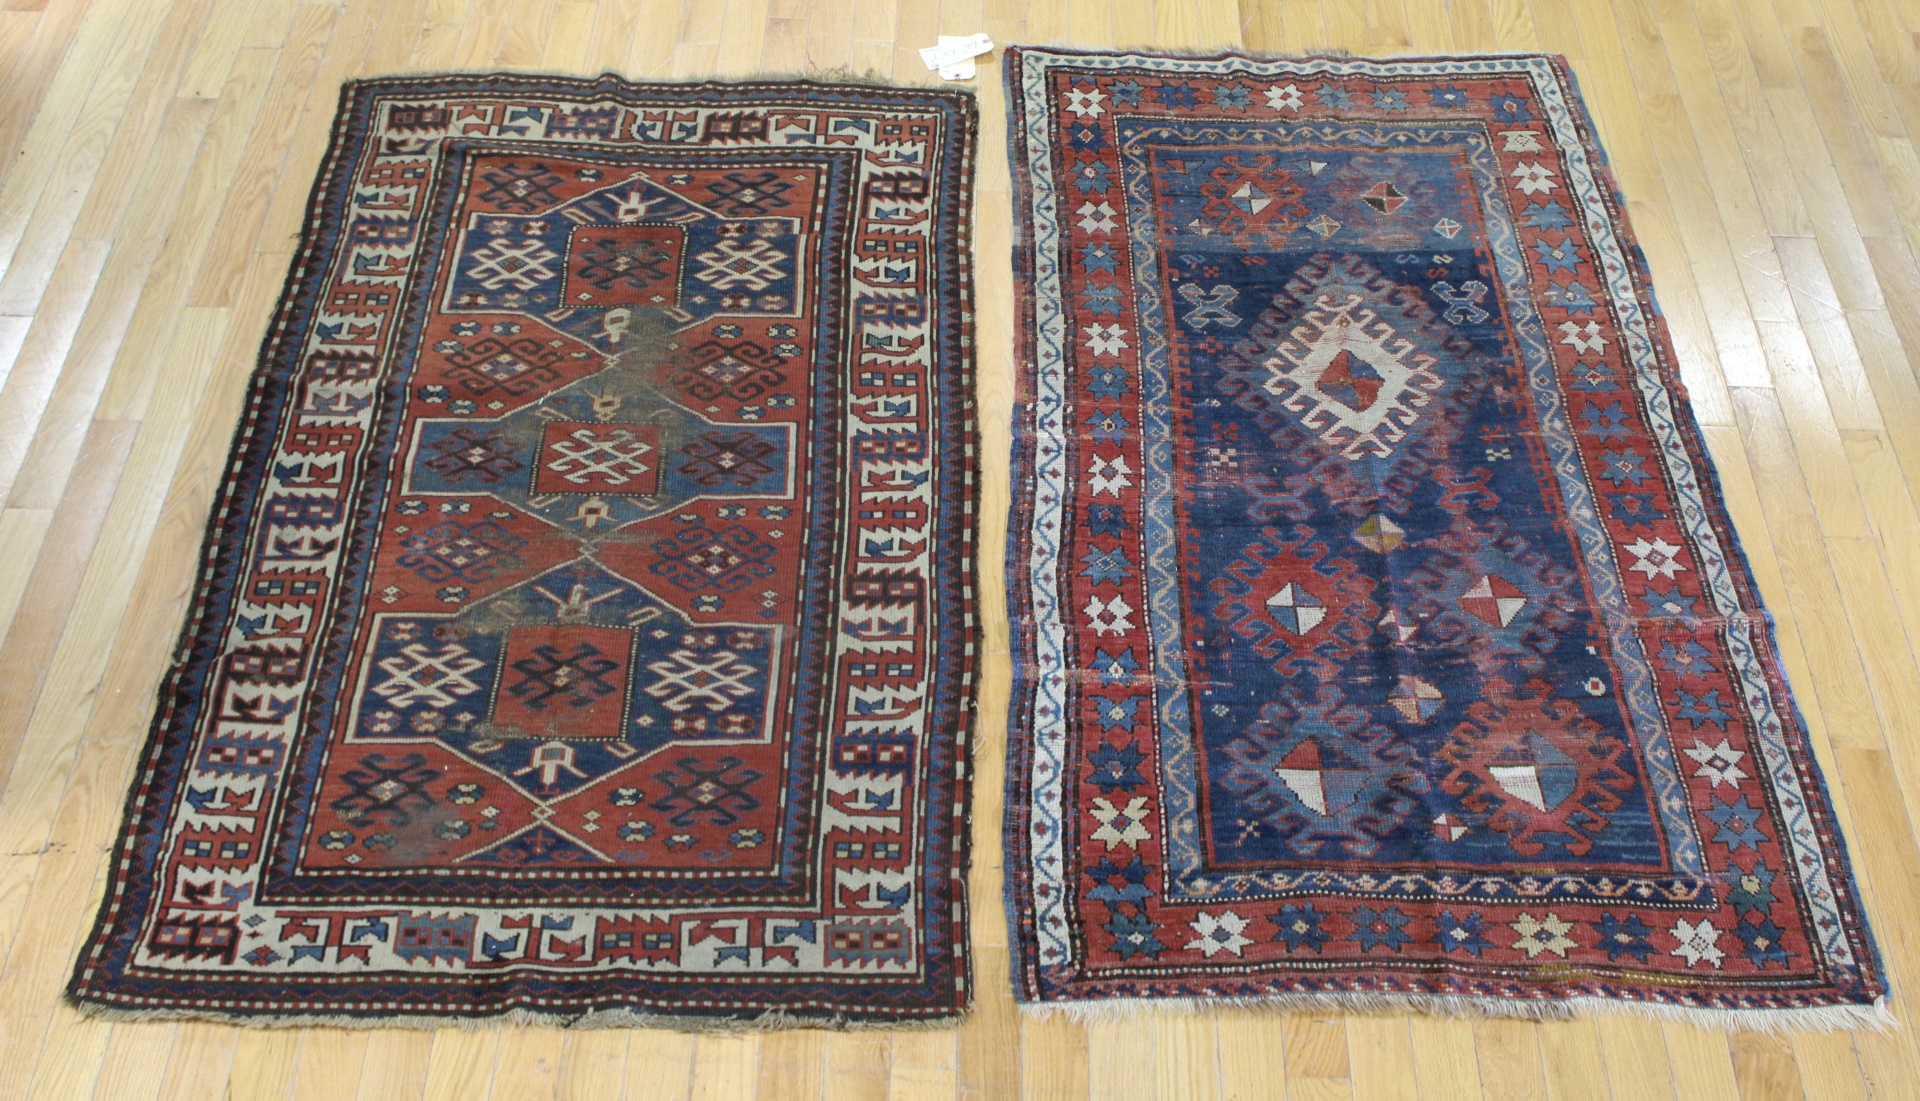 2 ANTIQUE AND FINELY HAND WOVEN 3ba5ca